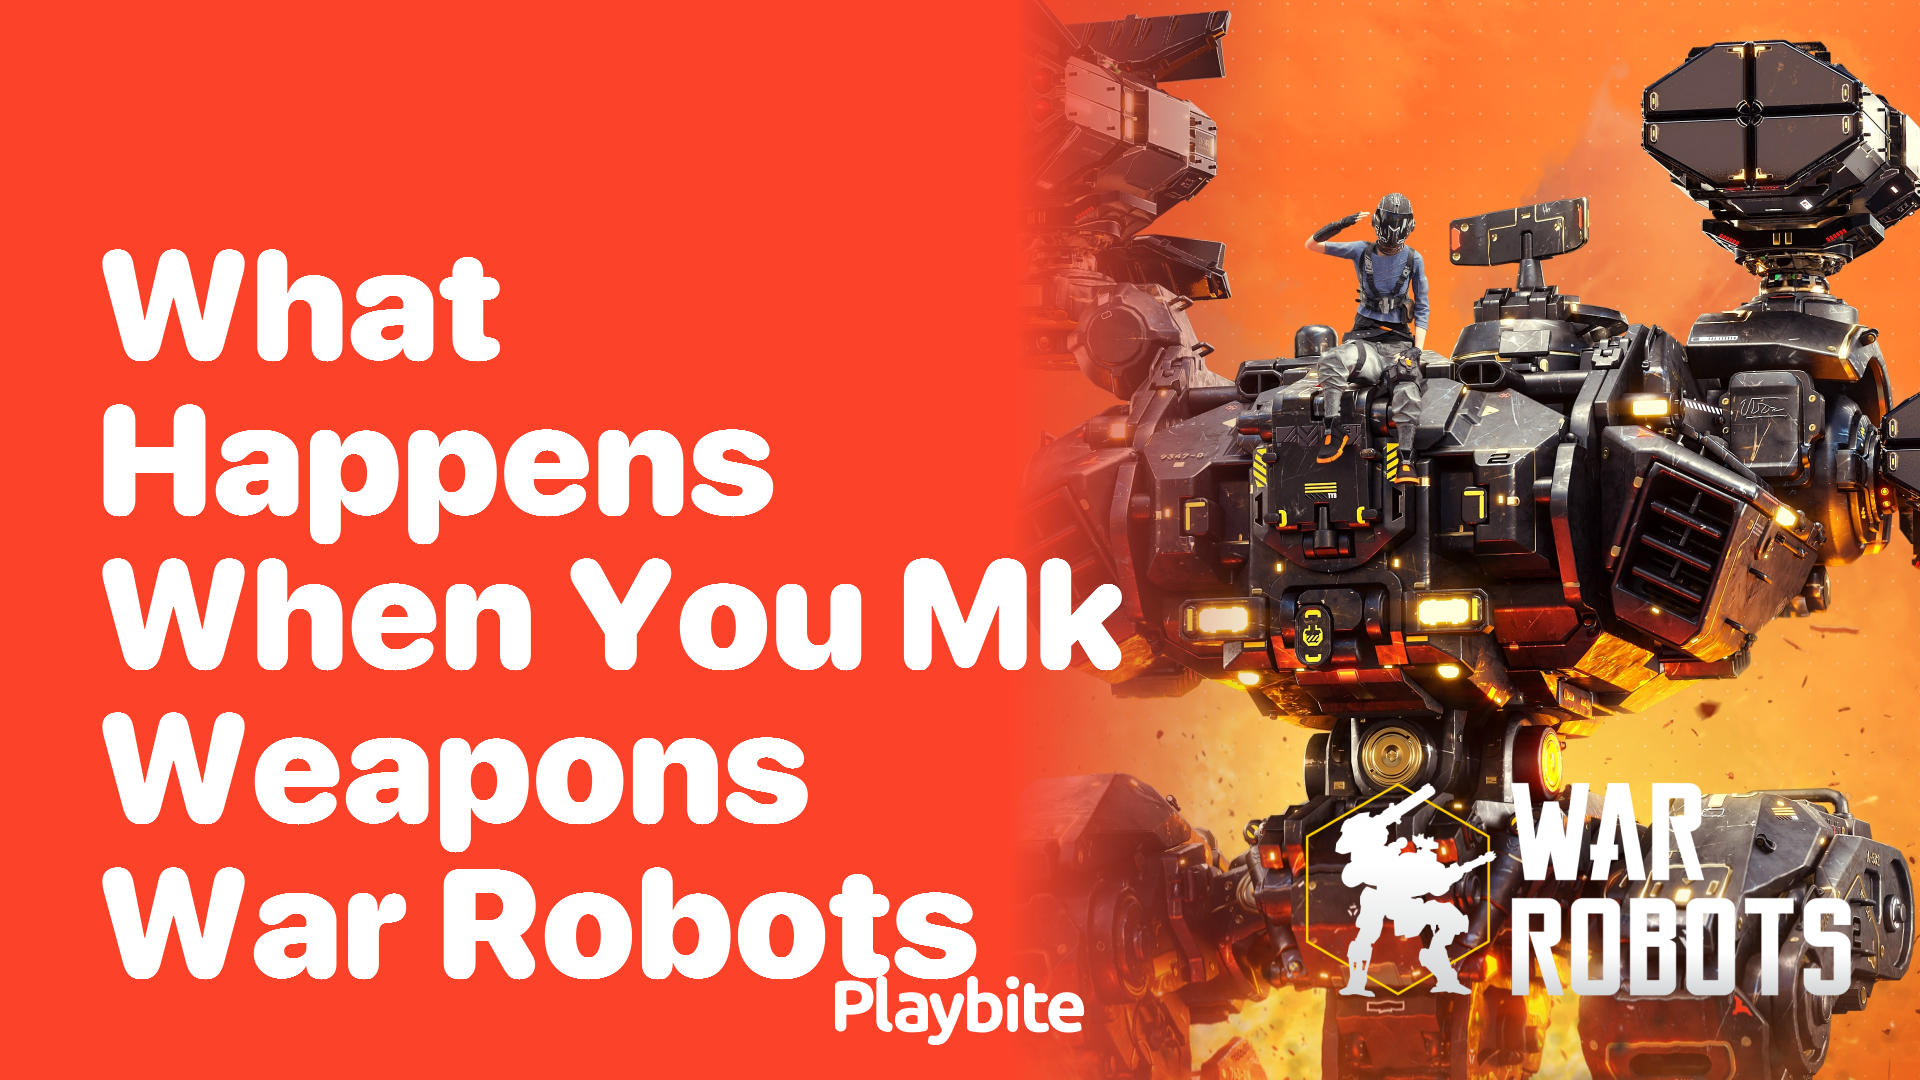 What Happens When You MK Weapons in War Robots?